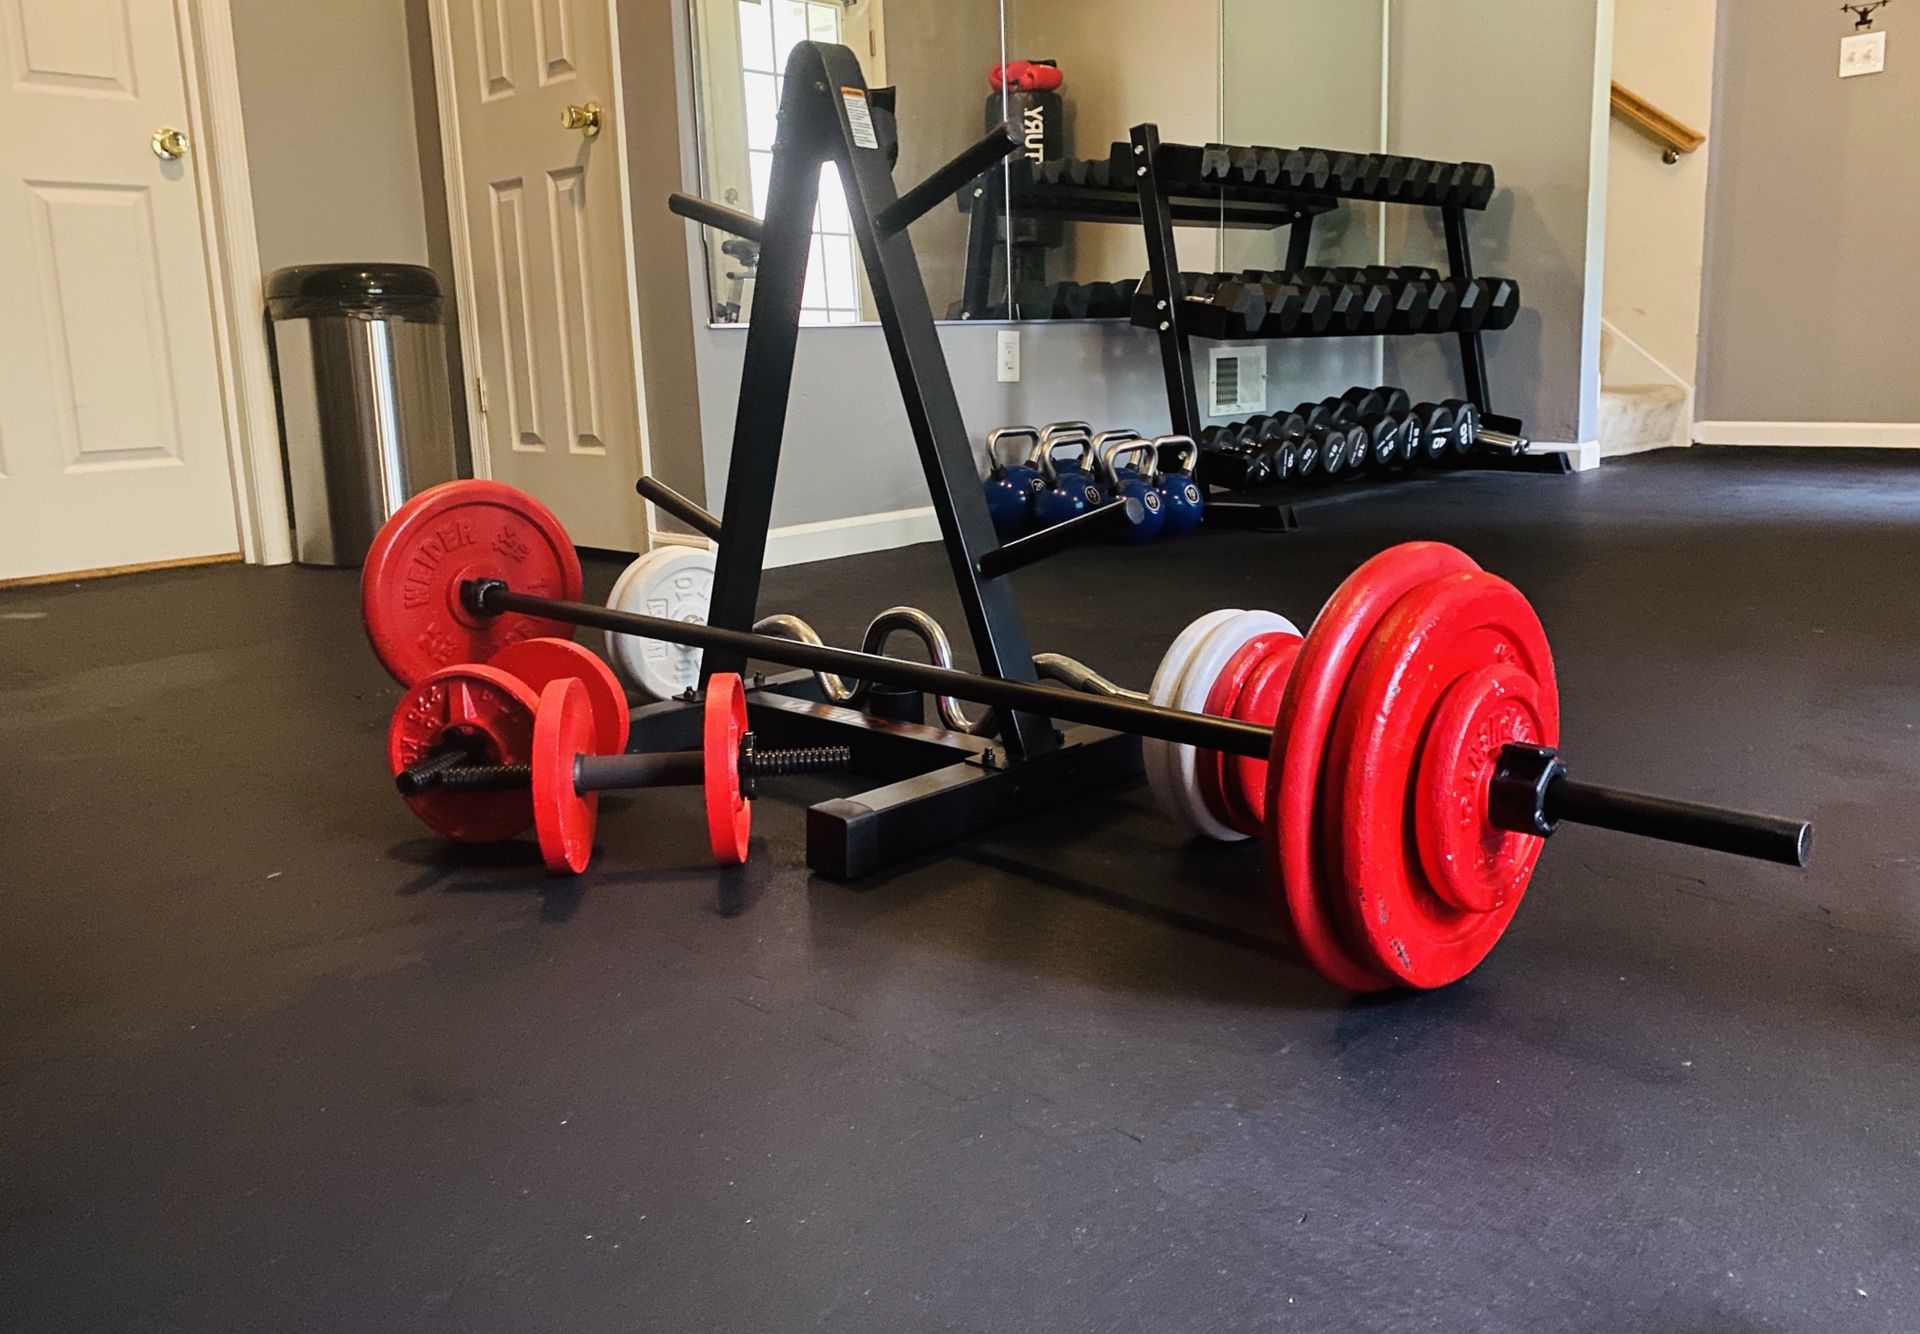 Barbell, Curl Bar, Dumbbell Weights ( 190lbs), Weight Rack for sale $480.